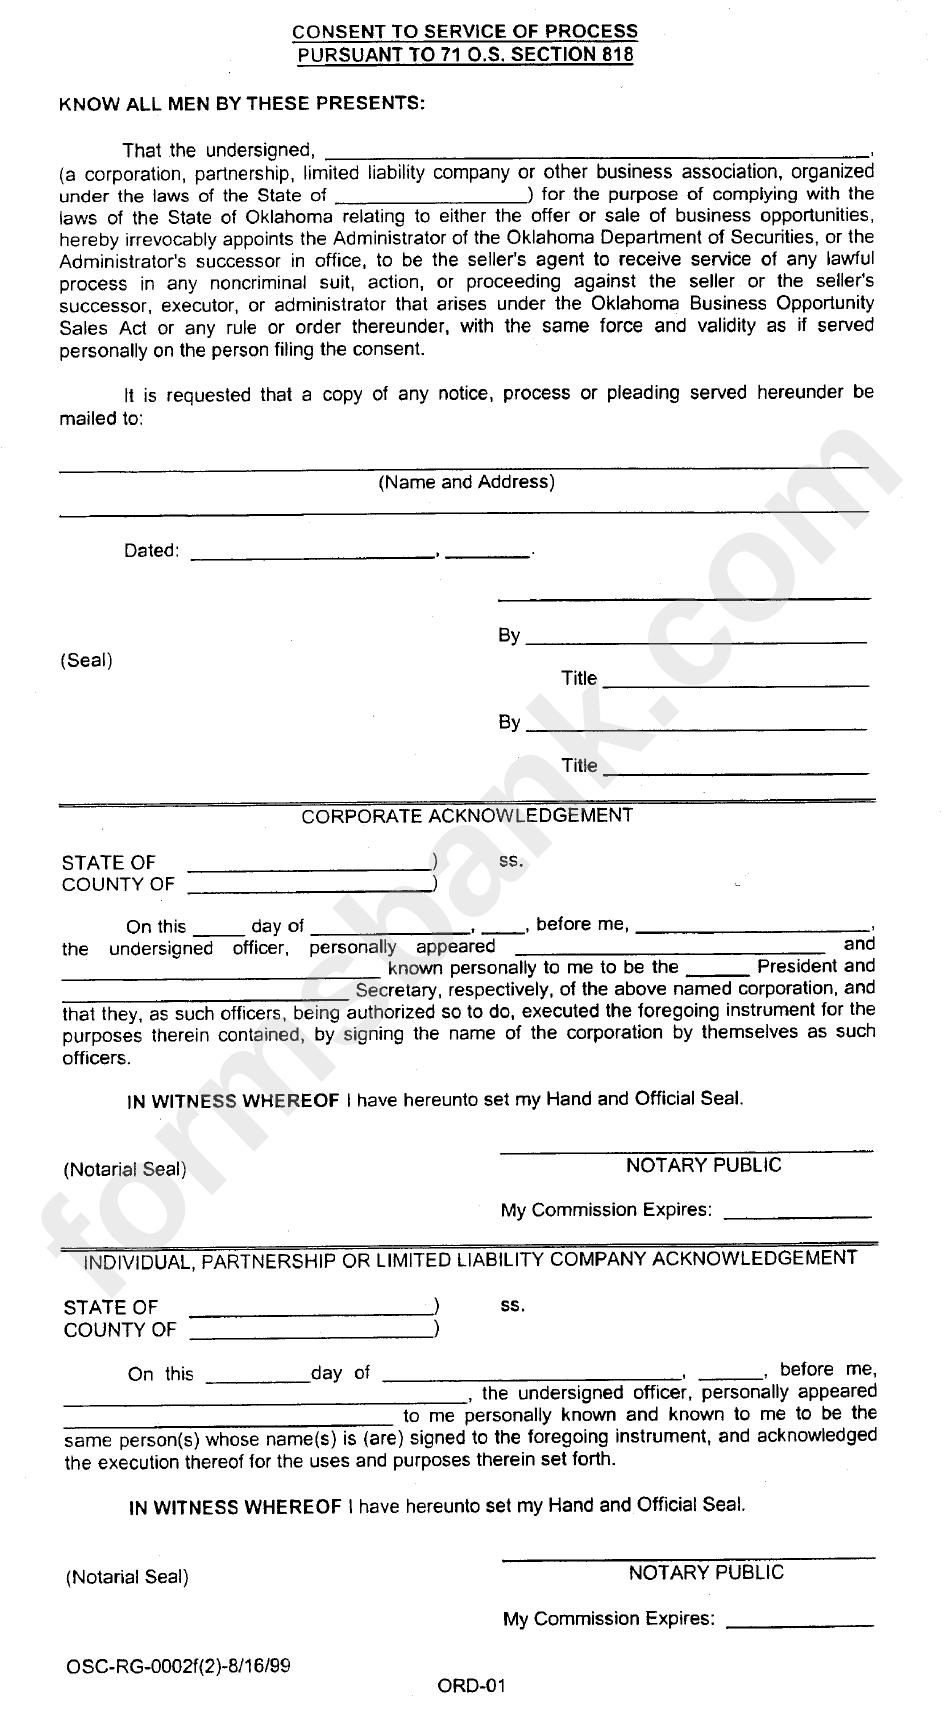 Consent To Service Of Process Form - 1999